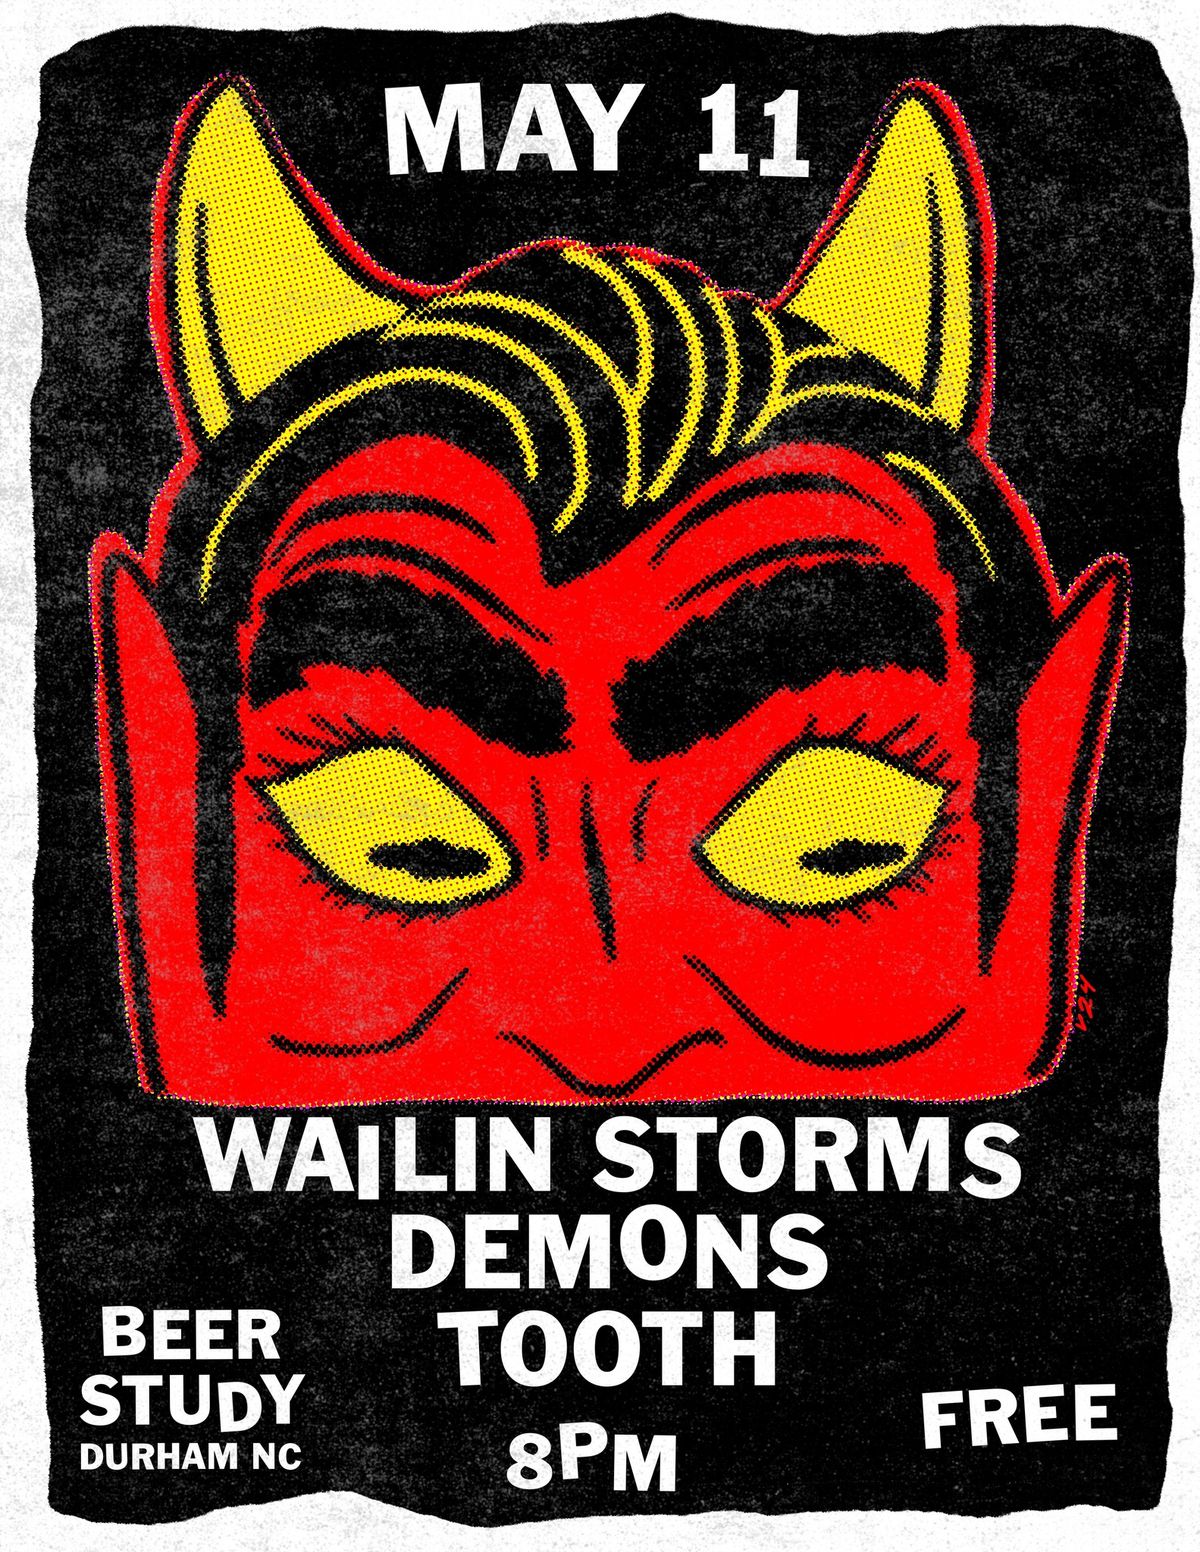 (FREE SHOW) Wailin Storms \/ Demons \/ Tooth at Beer Study Durham